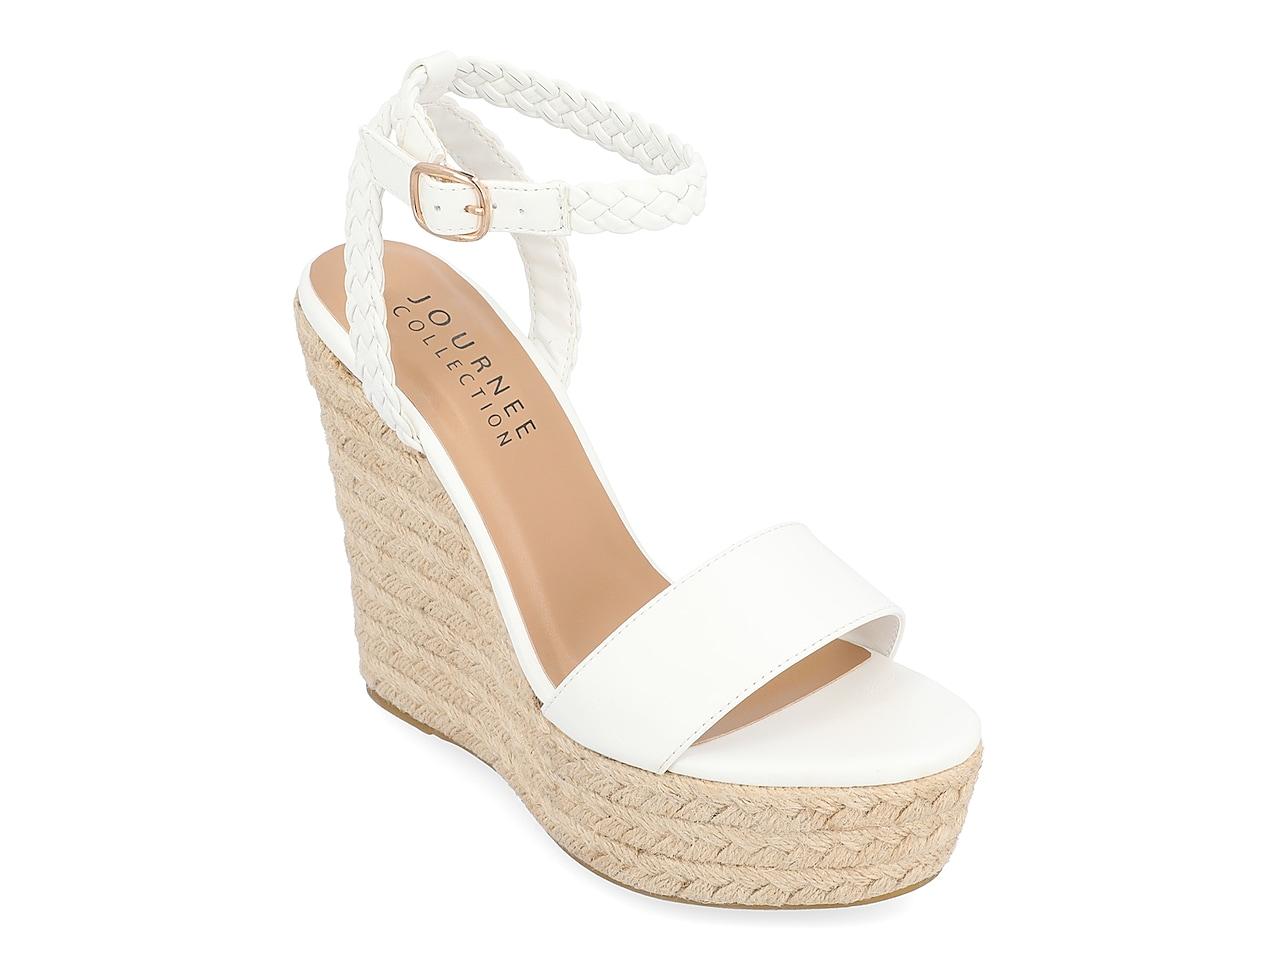 Journee Collection Andiah Espadrille Wedge Sandal in White | Lyst